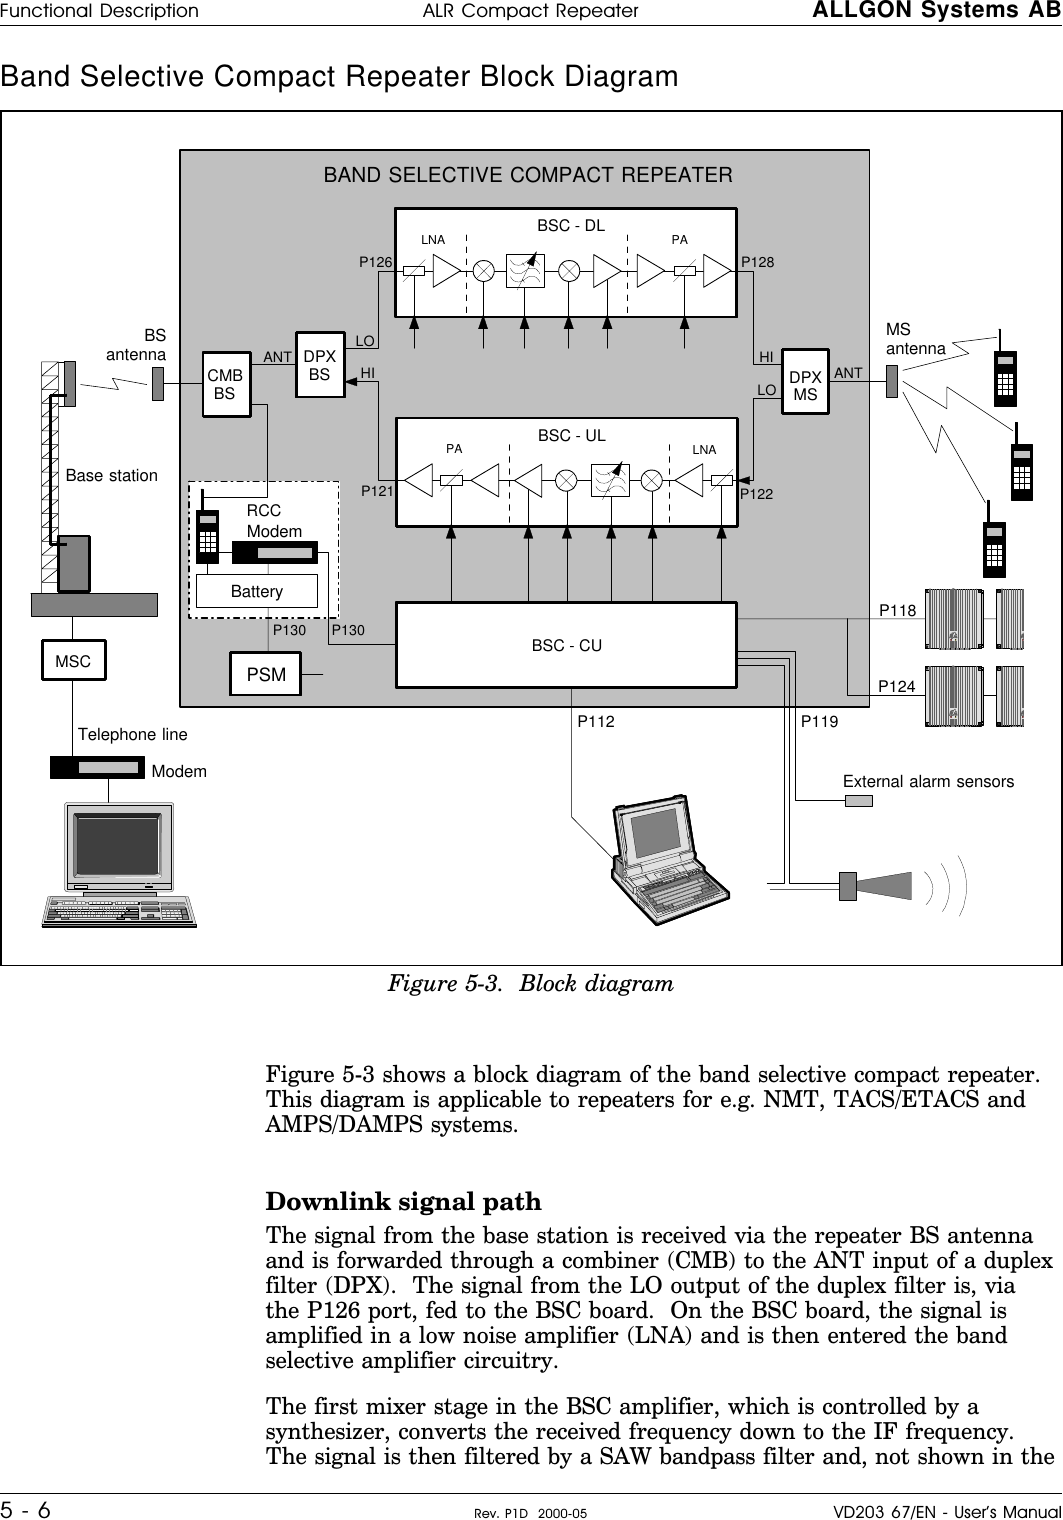 Band Selective Compact Repeater Block Diagram          Figure 5-3 shows a block diagram of the band selective compact repeater.This diagram is applicable to repeaters for e.g. NMT, TACS/ETACS andAMPS/DAMPS systems.Downlink signal pathThe signal from the base station is received via the repeater BS antennaand is forwarded through a combiner (CMB) to the ANT input of a duplexfilter (DPX).  The signal from the LO output of the duplex filter is, viathe P126 port, fed to the BSC board.  On the BSC board, the signal isamplified in a low noise amplifier (LNA) and is then entered the bandselective amplifier circuitry.The first mixer stage in the BSC amplifier, which is controlled by asynthesizer, converts the received frequency down to the IF frequency.The signal is then filtered by a SAW bandpass filter and, not shown in theRCCBSC - ULPA LNAP121 P122BSC - DL PALNAP126 P128P130P112 P119P130DPXMSP118BSC - CUP124CMBBSANT HILO HILO ANTDPXBSMSC PSMBAND SELECTIVE COMPACT REPEATERBSantennaBase stationTelephone lineModemModemBatteryExternal alarm sensorsMSantennaFigure 5-3.  Block diagramFunctional Description ALR Compact Repeater ALLGON Systems AB5 - 6 Rev. P1D  2000-05 VD203 67/EN - User’s Manual